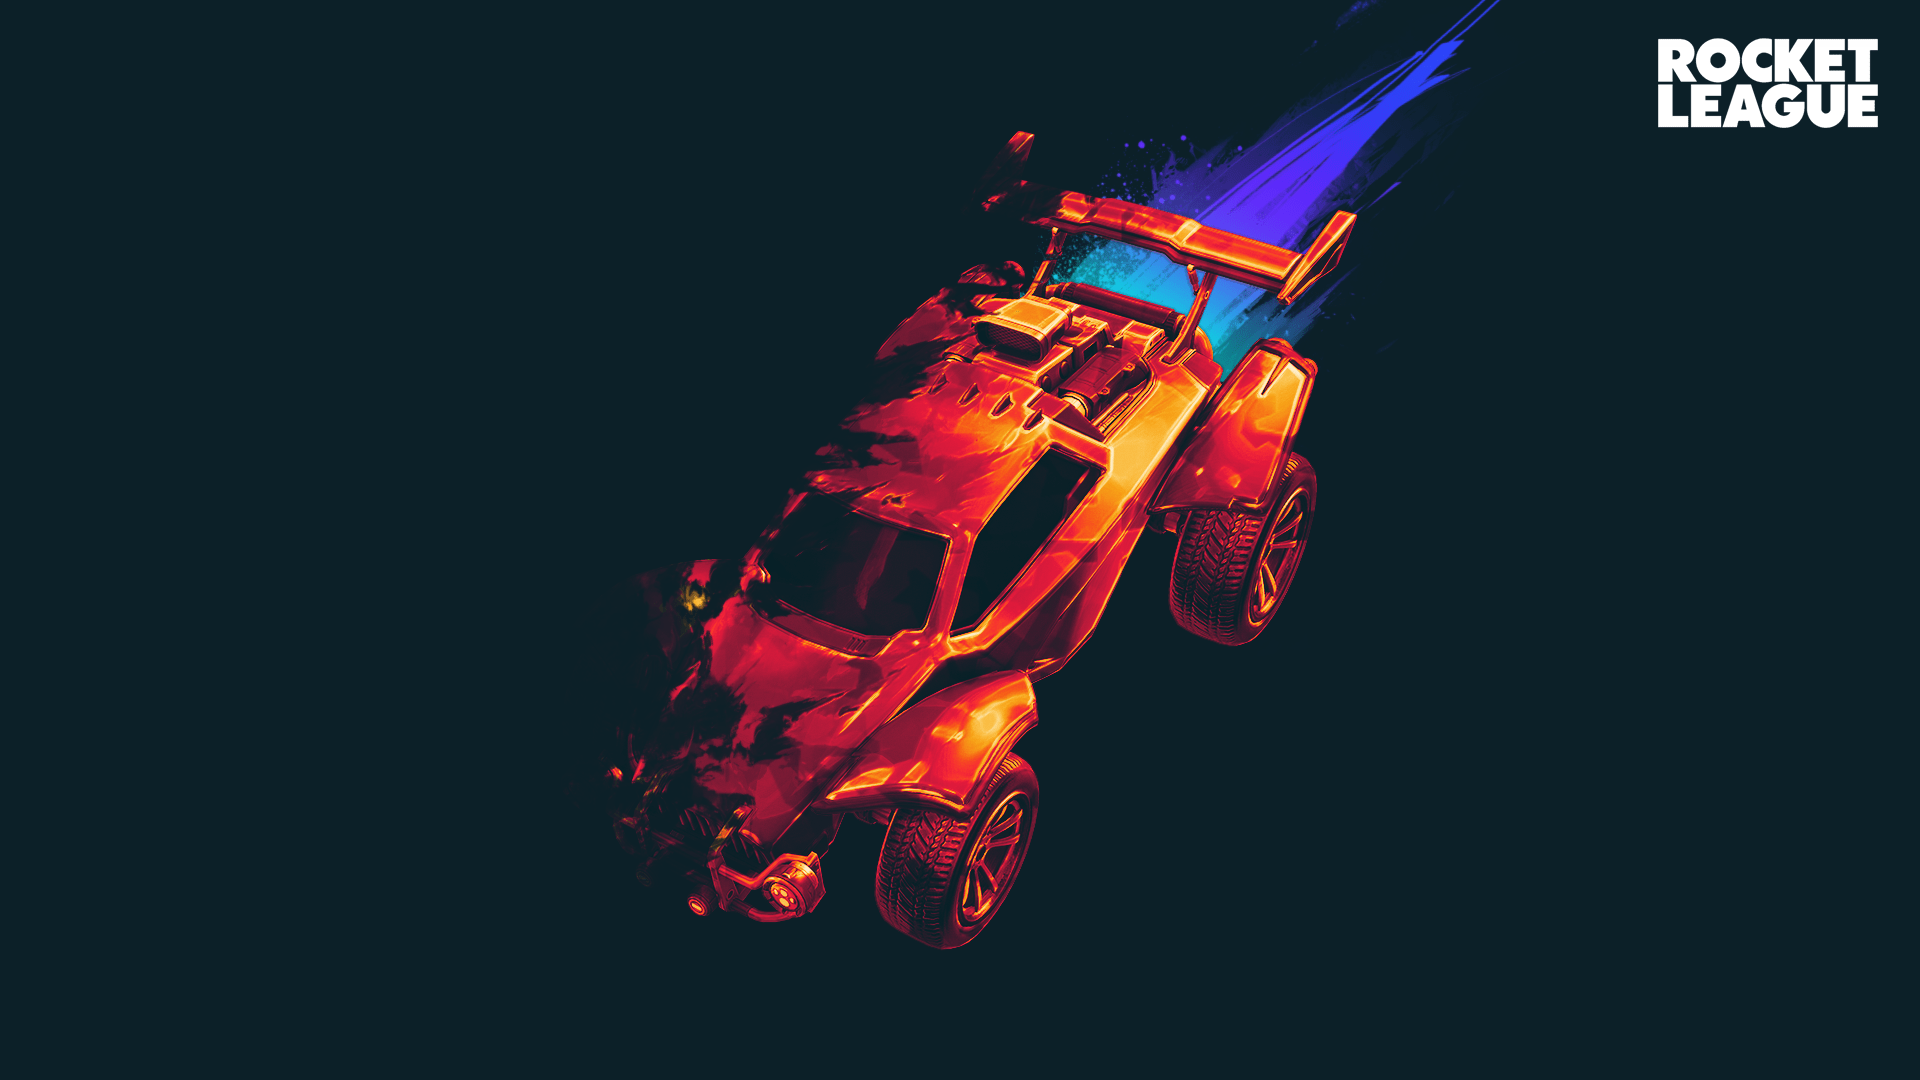 Cool Rocket League Wallpapers : Rocket League Octane | Wallpaperize in 2020 | Rocket ... : A collection of the top 46 rocket league wallpapers and backgrounds available for download for free.